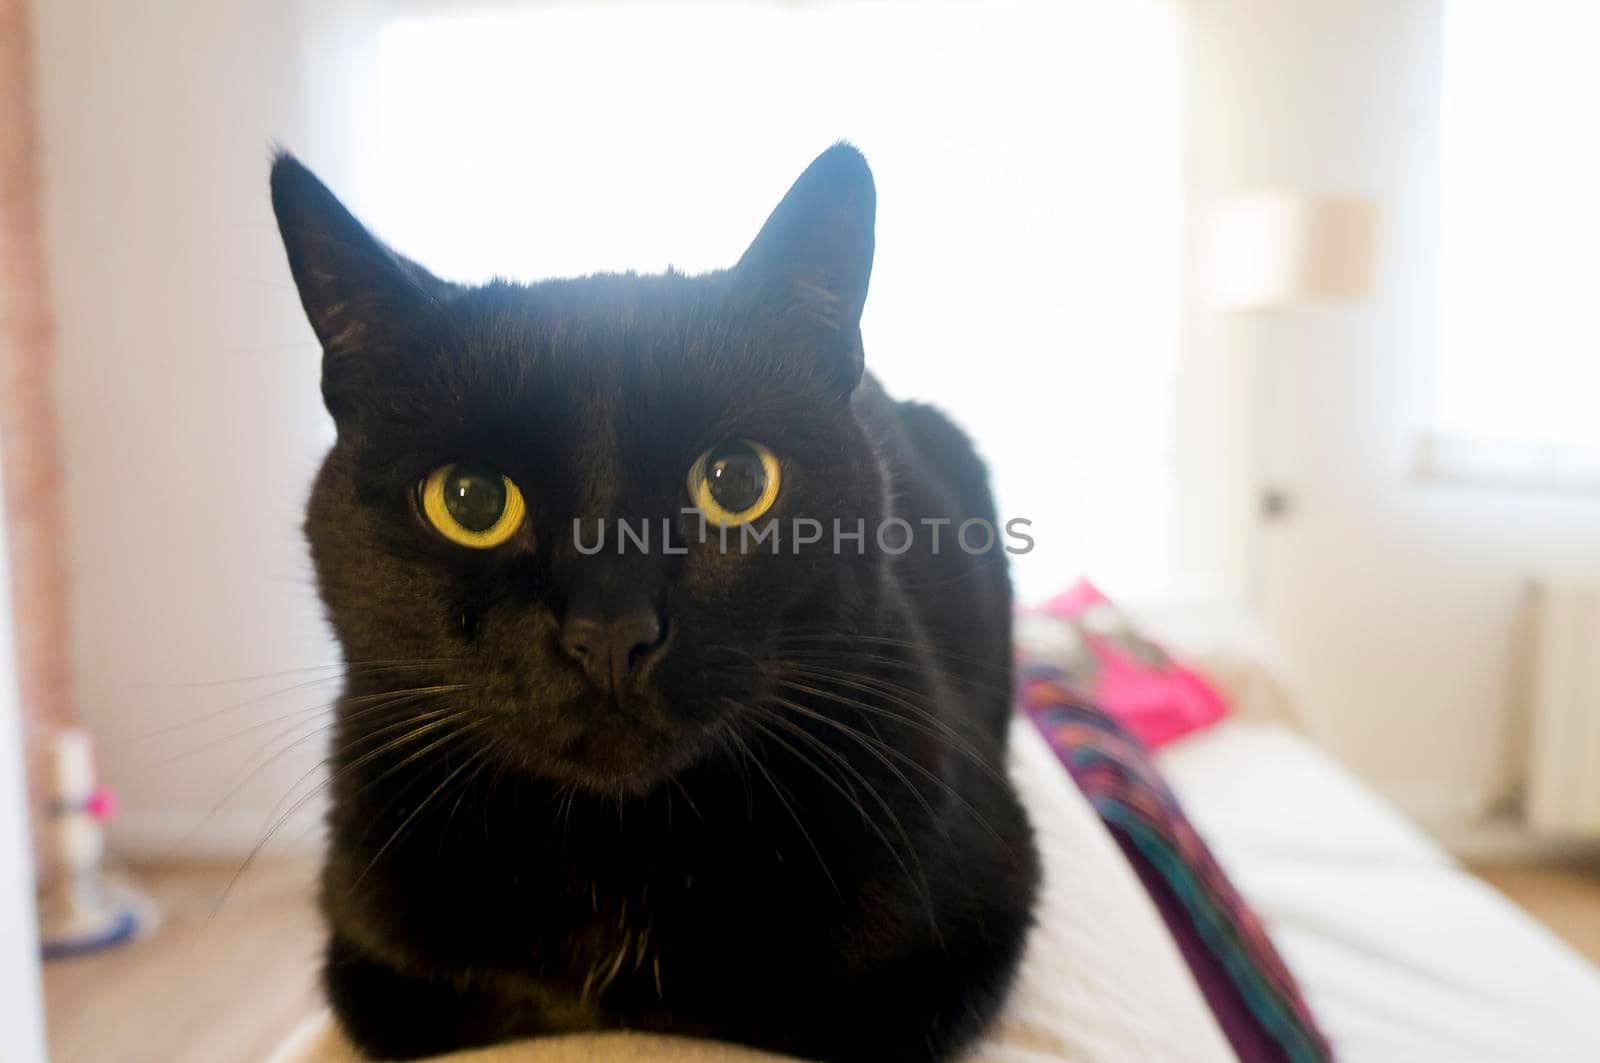 A black cat with yellow eyes lies on a sofa.